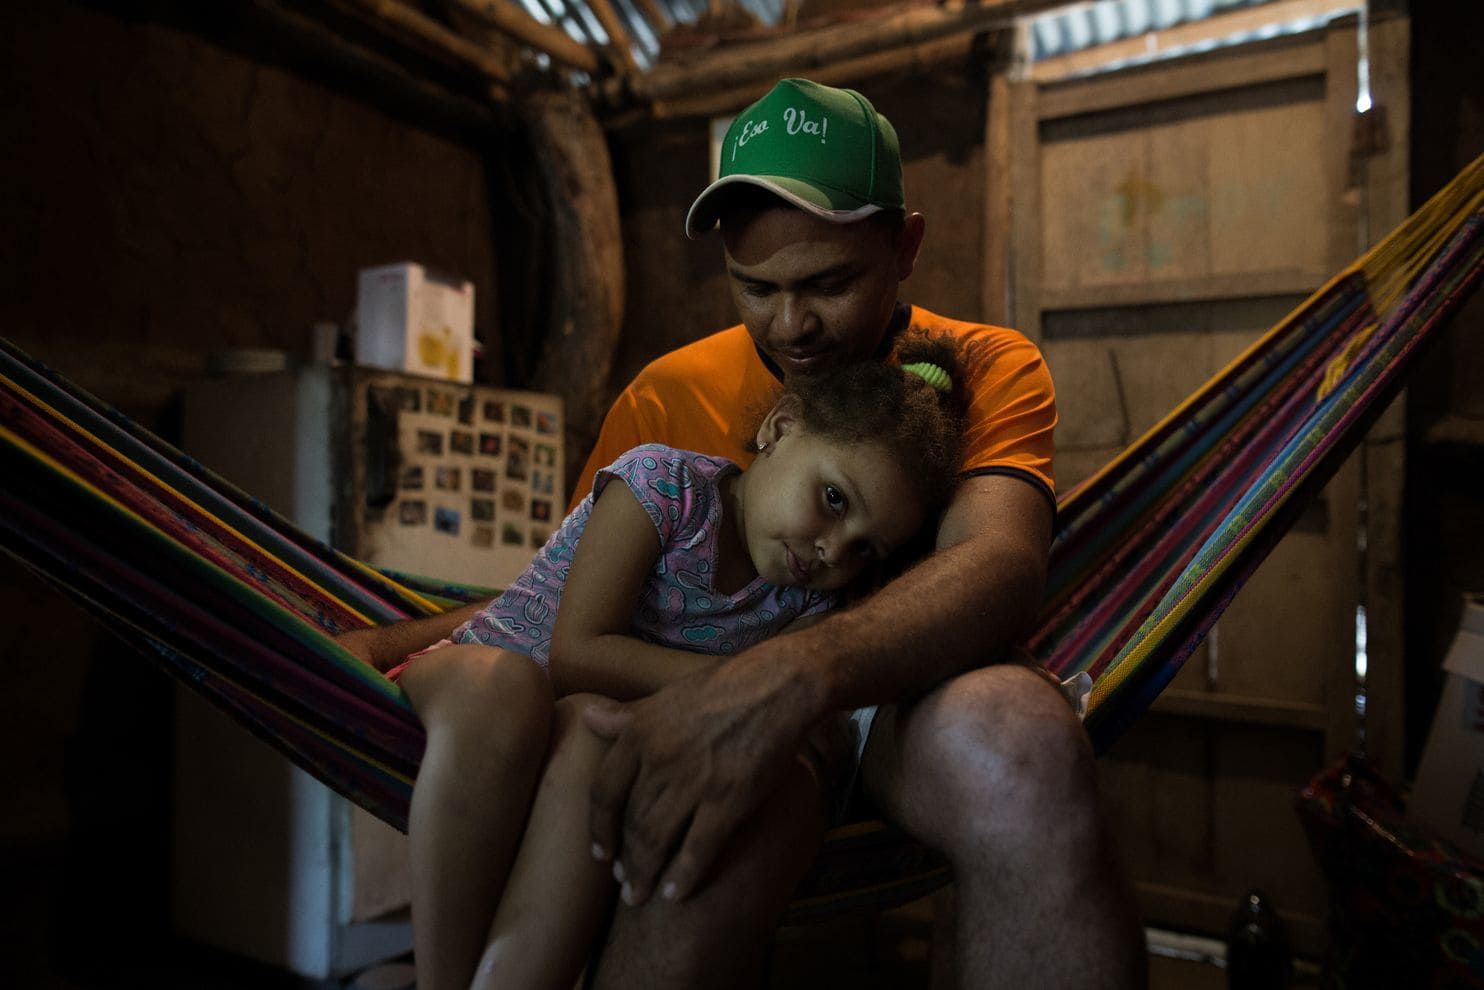 Luis “Lucho” Salgado, 32, with his daughter, Karen, 6, says he prefers not to talk about what happened the day of the 1996 massacre. For many people, it remains too painful. He lost two uncles that day and hopes his daughter will see a better future in this region now that the conflict has ended. Image by Ivan Valencia/For The Washington Post. Colombia, 2018.